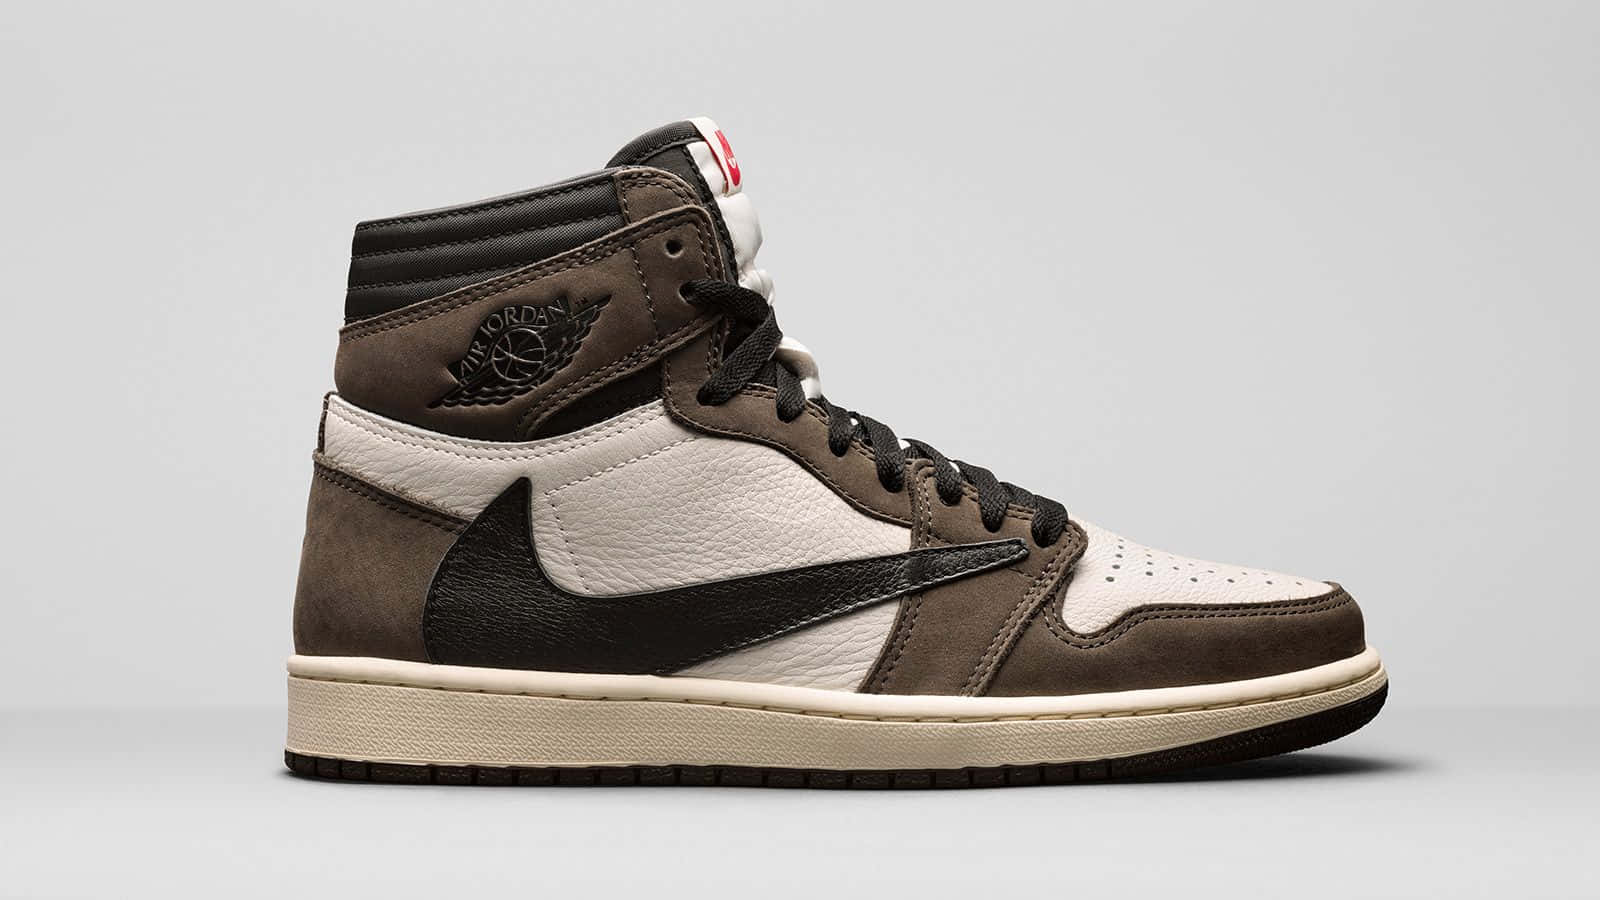 Get Fresh and Fly with the New Travis Scott Jordan 1 Wallpaper